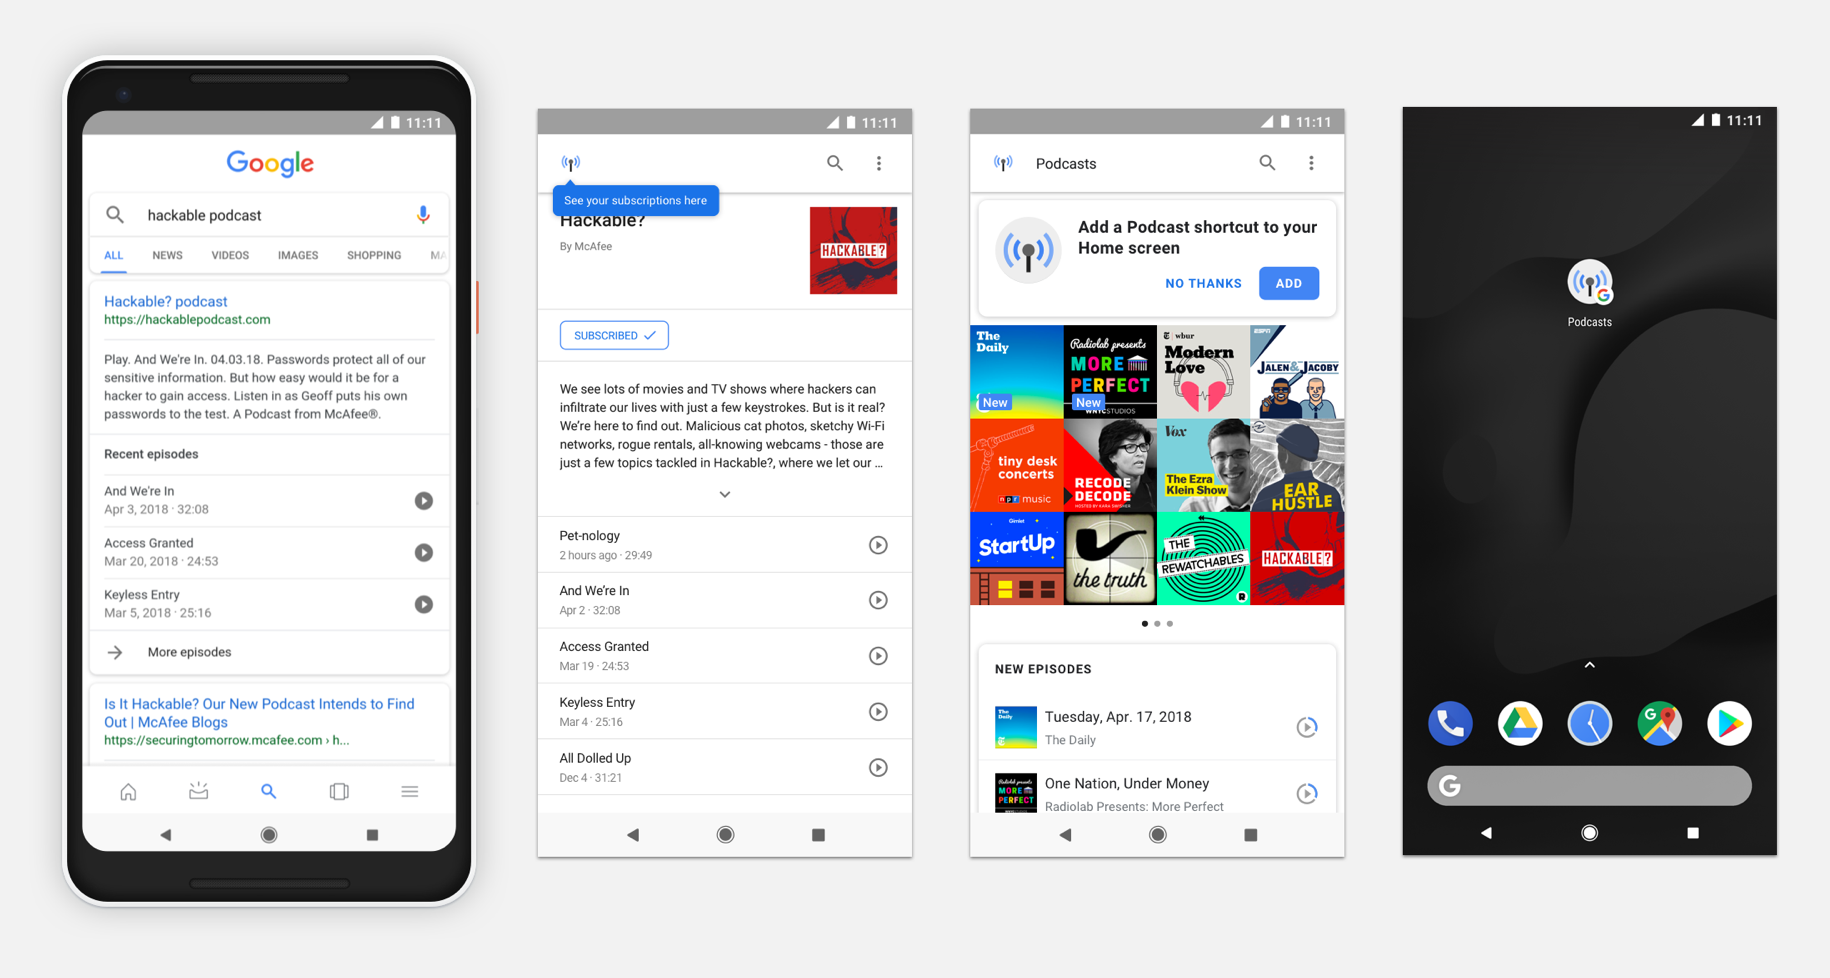 Google Includes A New Podcast Player Feature For Android Users